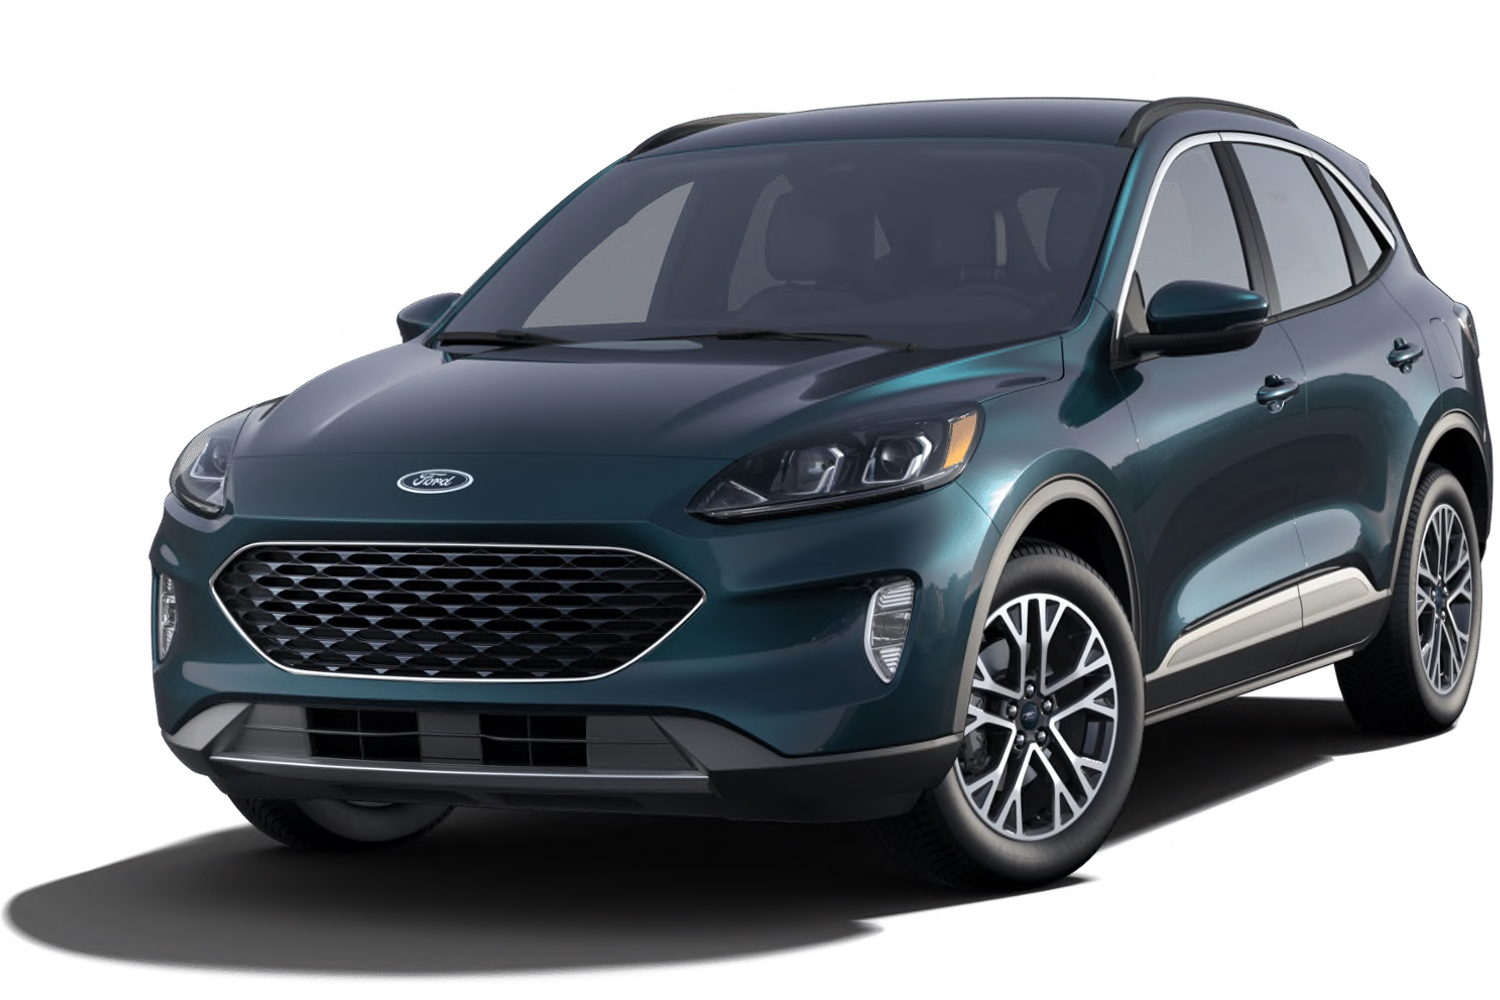 Ford Escape Gets New Dark Persian Green Color First Look